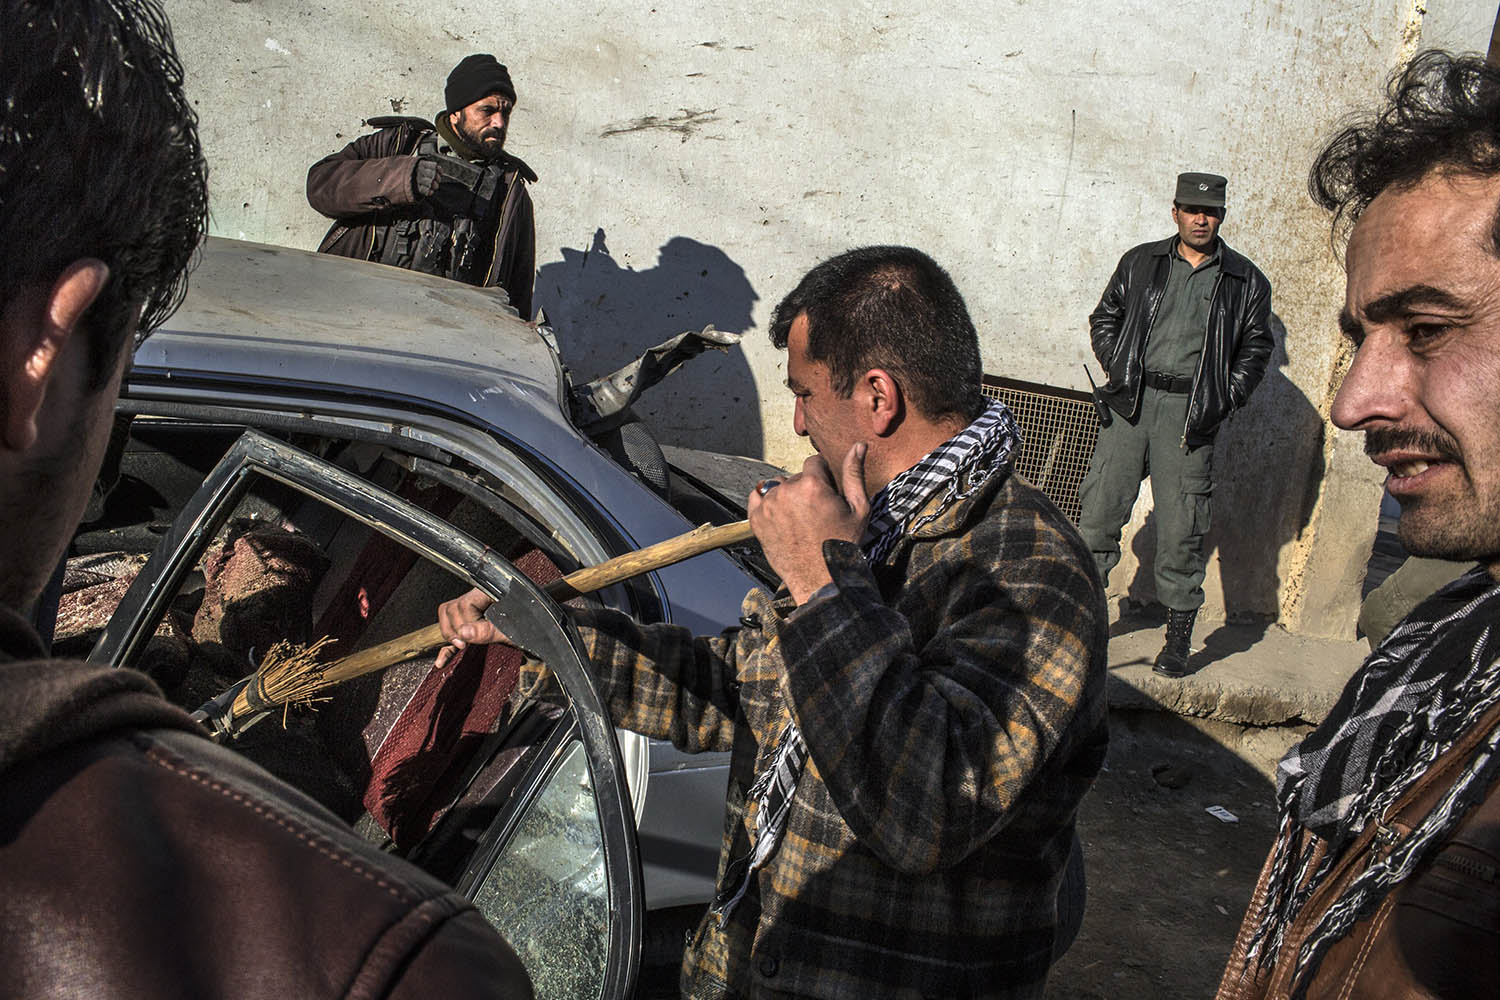 A man sweeps out his damaged car near the entrance of a restaurant that was attacked in Kabul, Afghanistan.